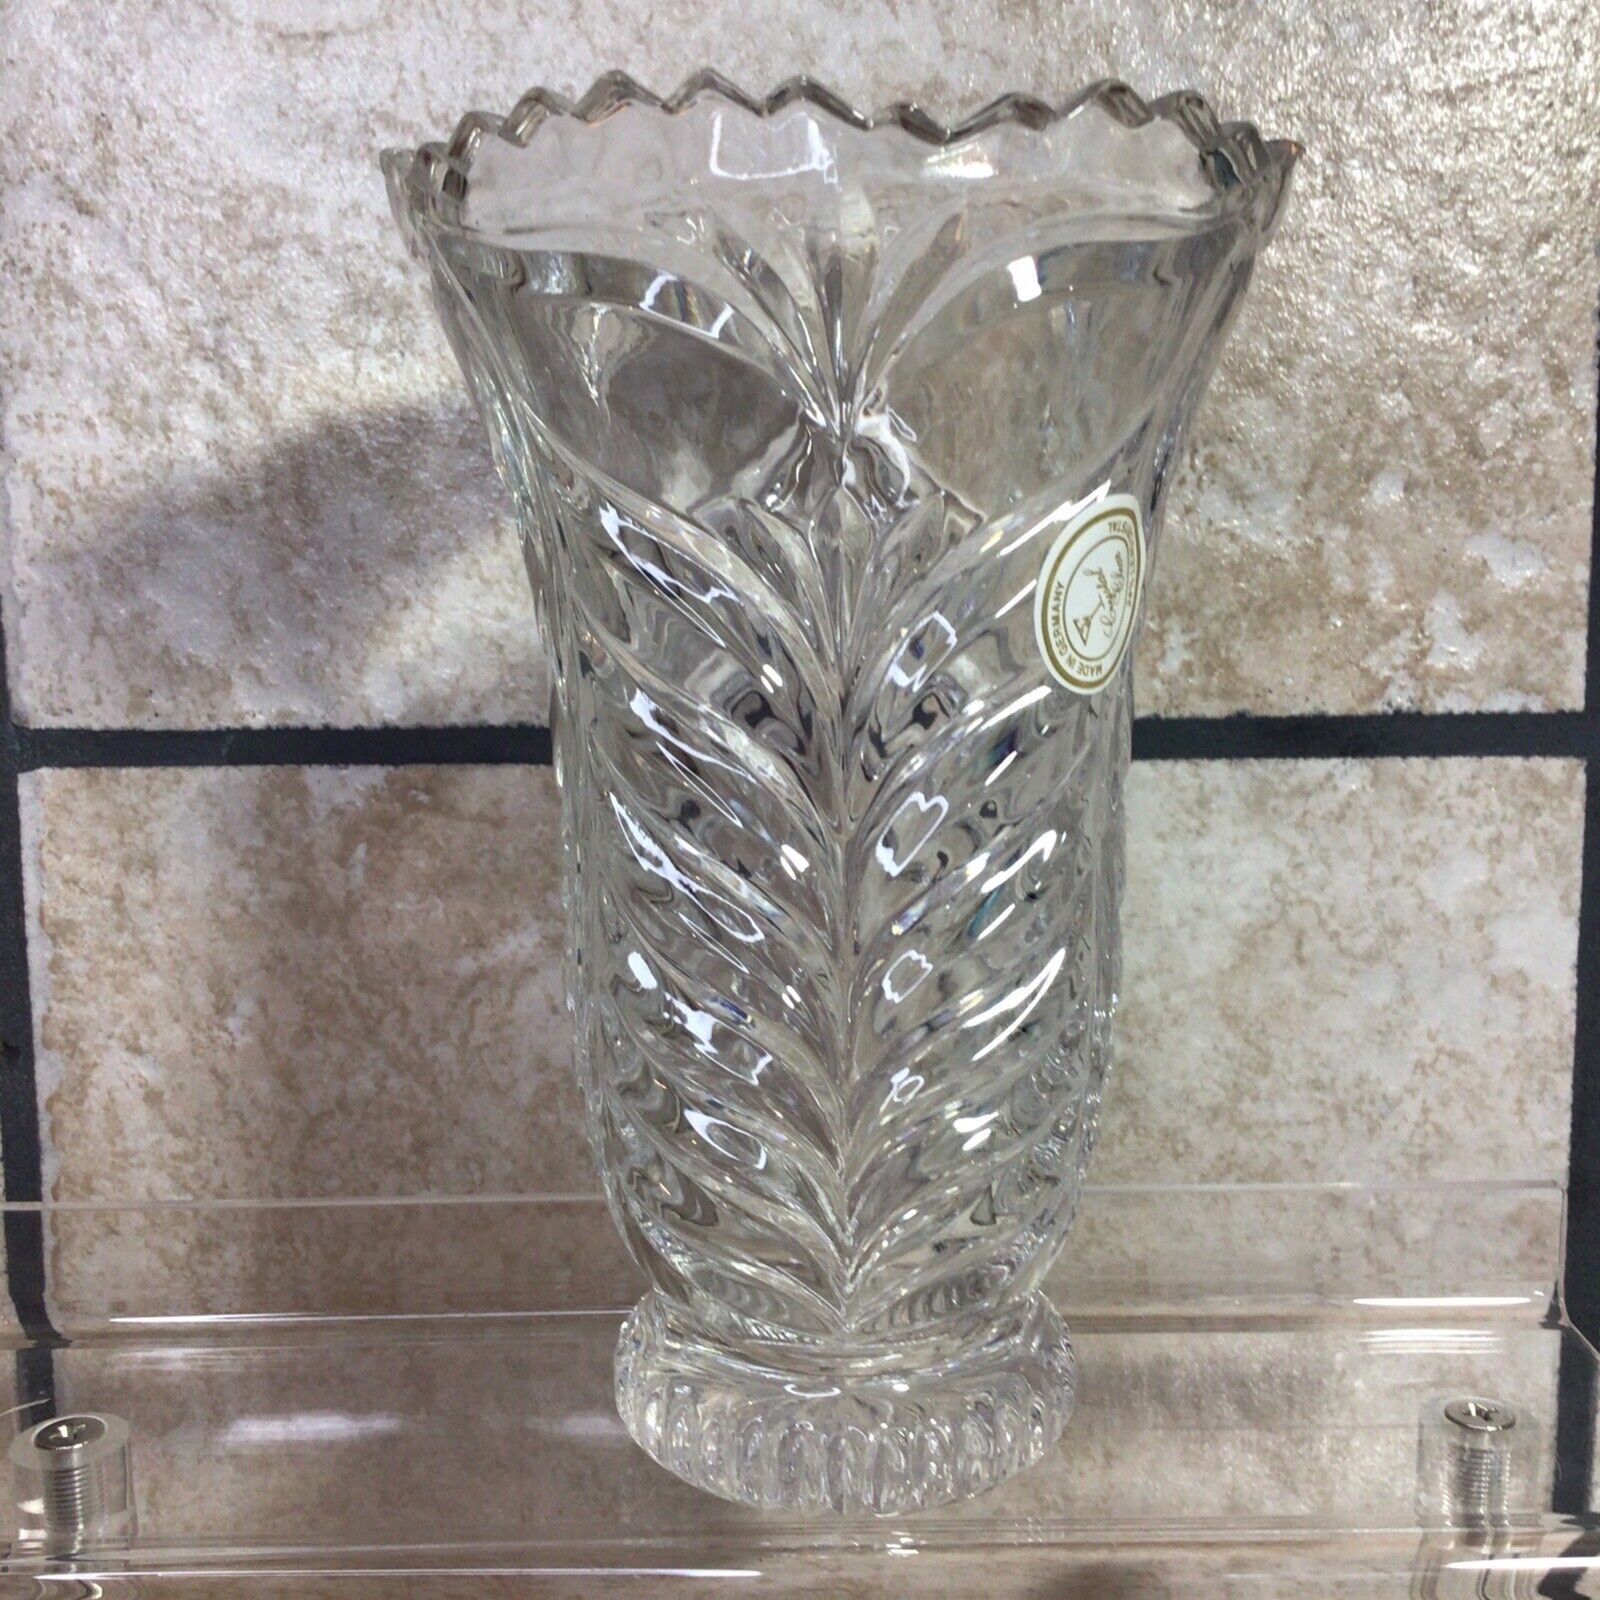 Lead Crystal 24% Vase 6” Footed Cut Glass Braided Pattern Jagged Edge Germany